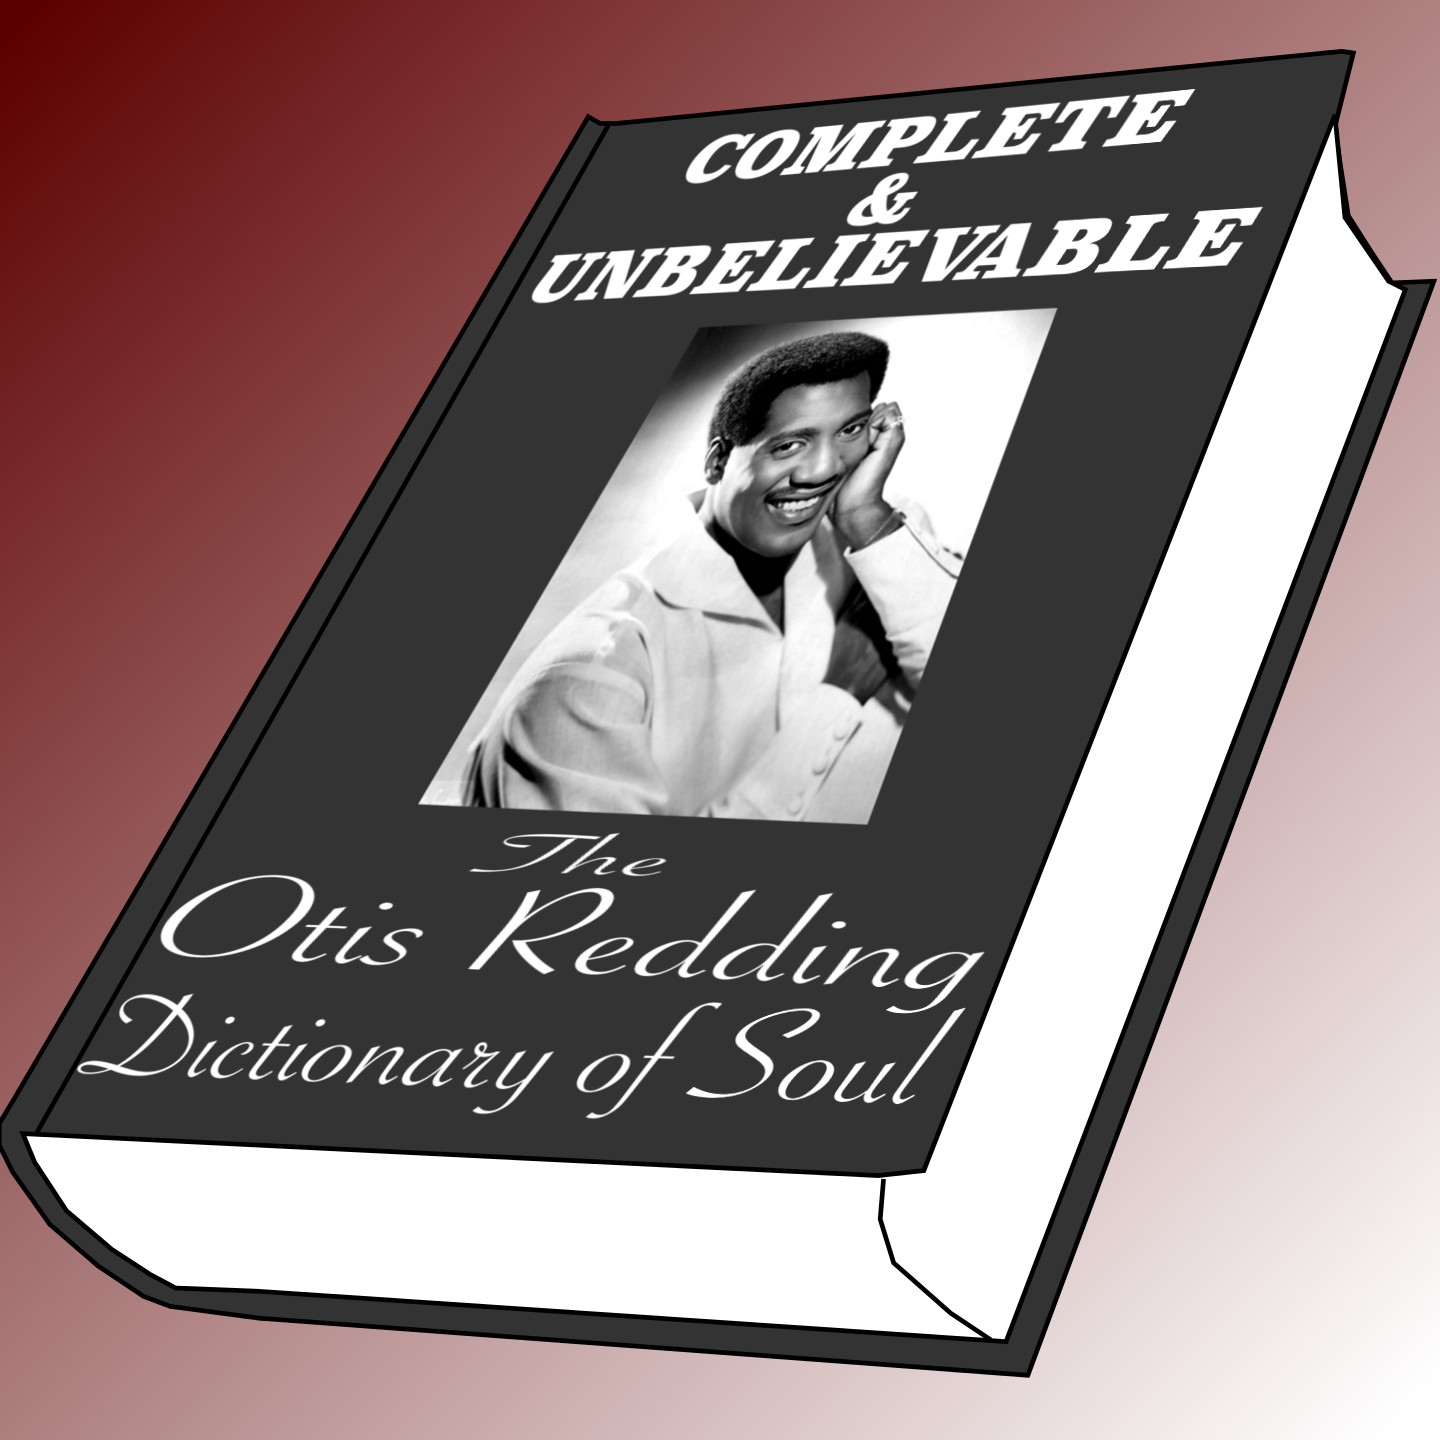 Complete and Unbelievable: The Otis Redding Dictionary of Soul